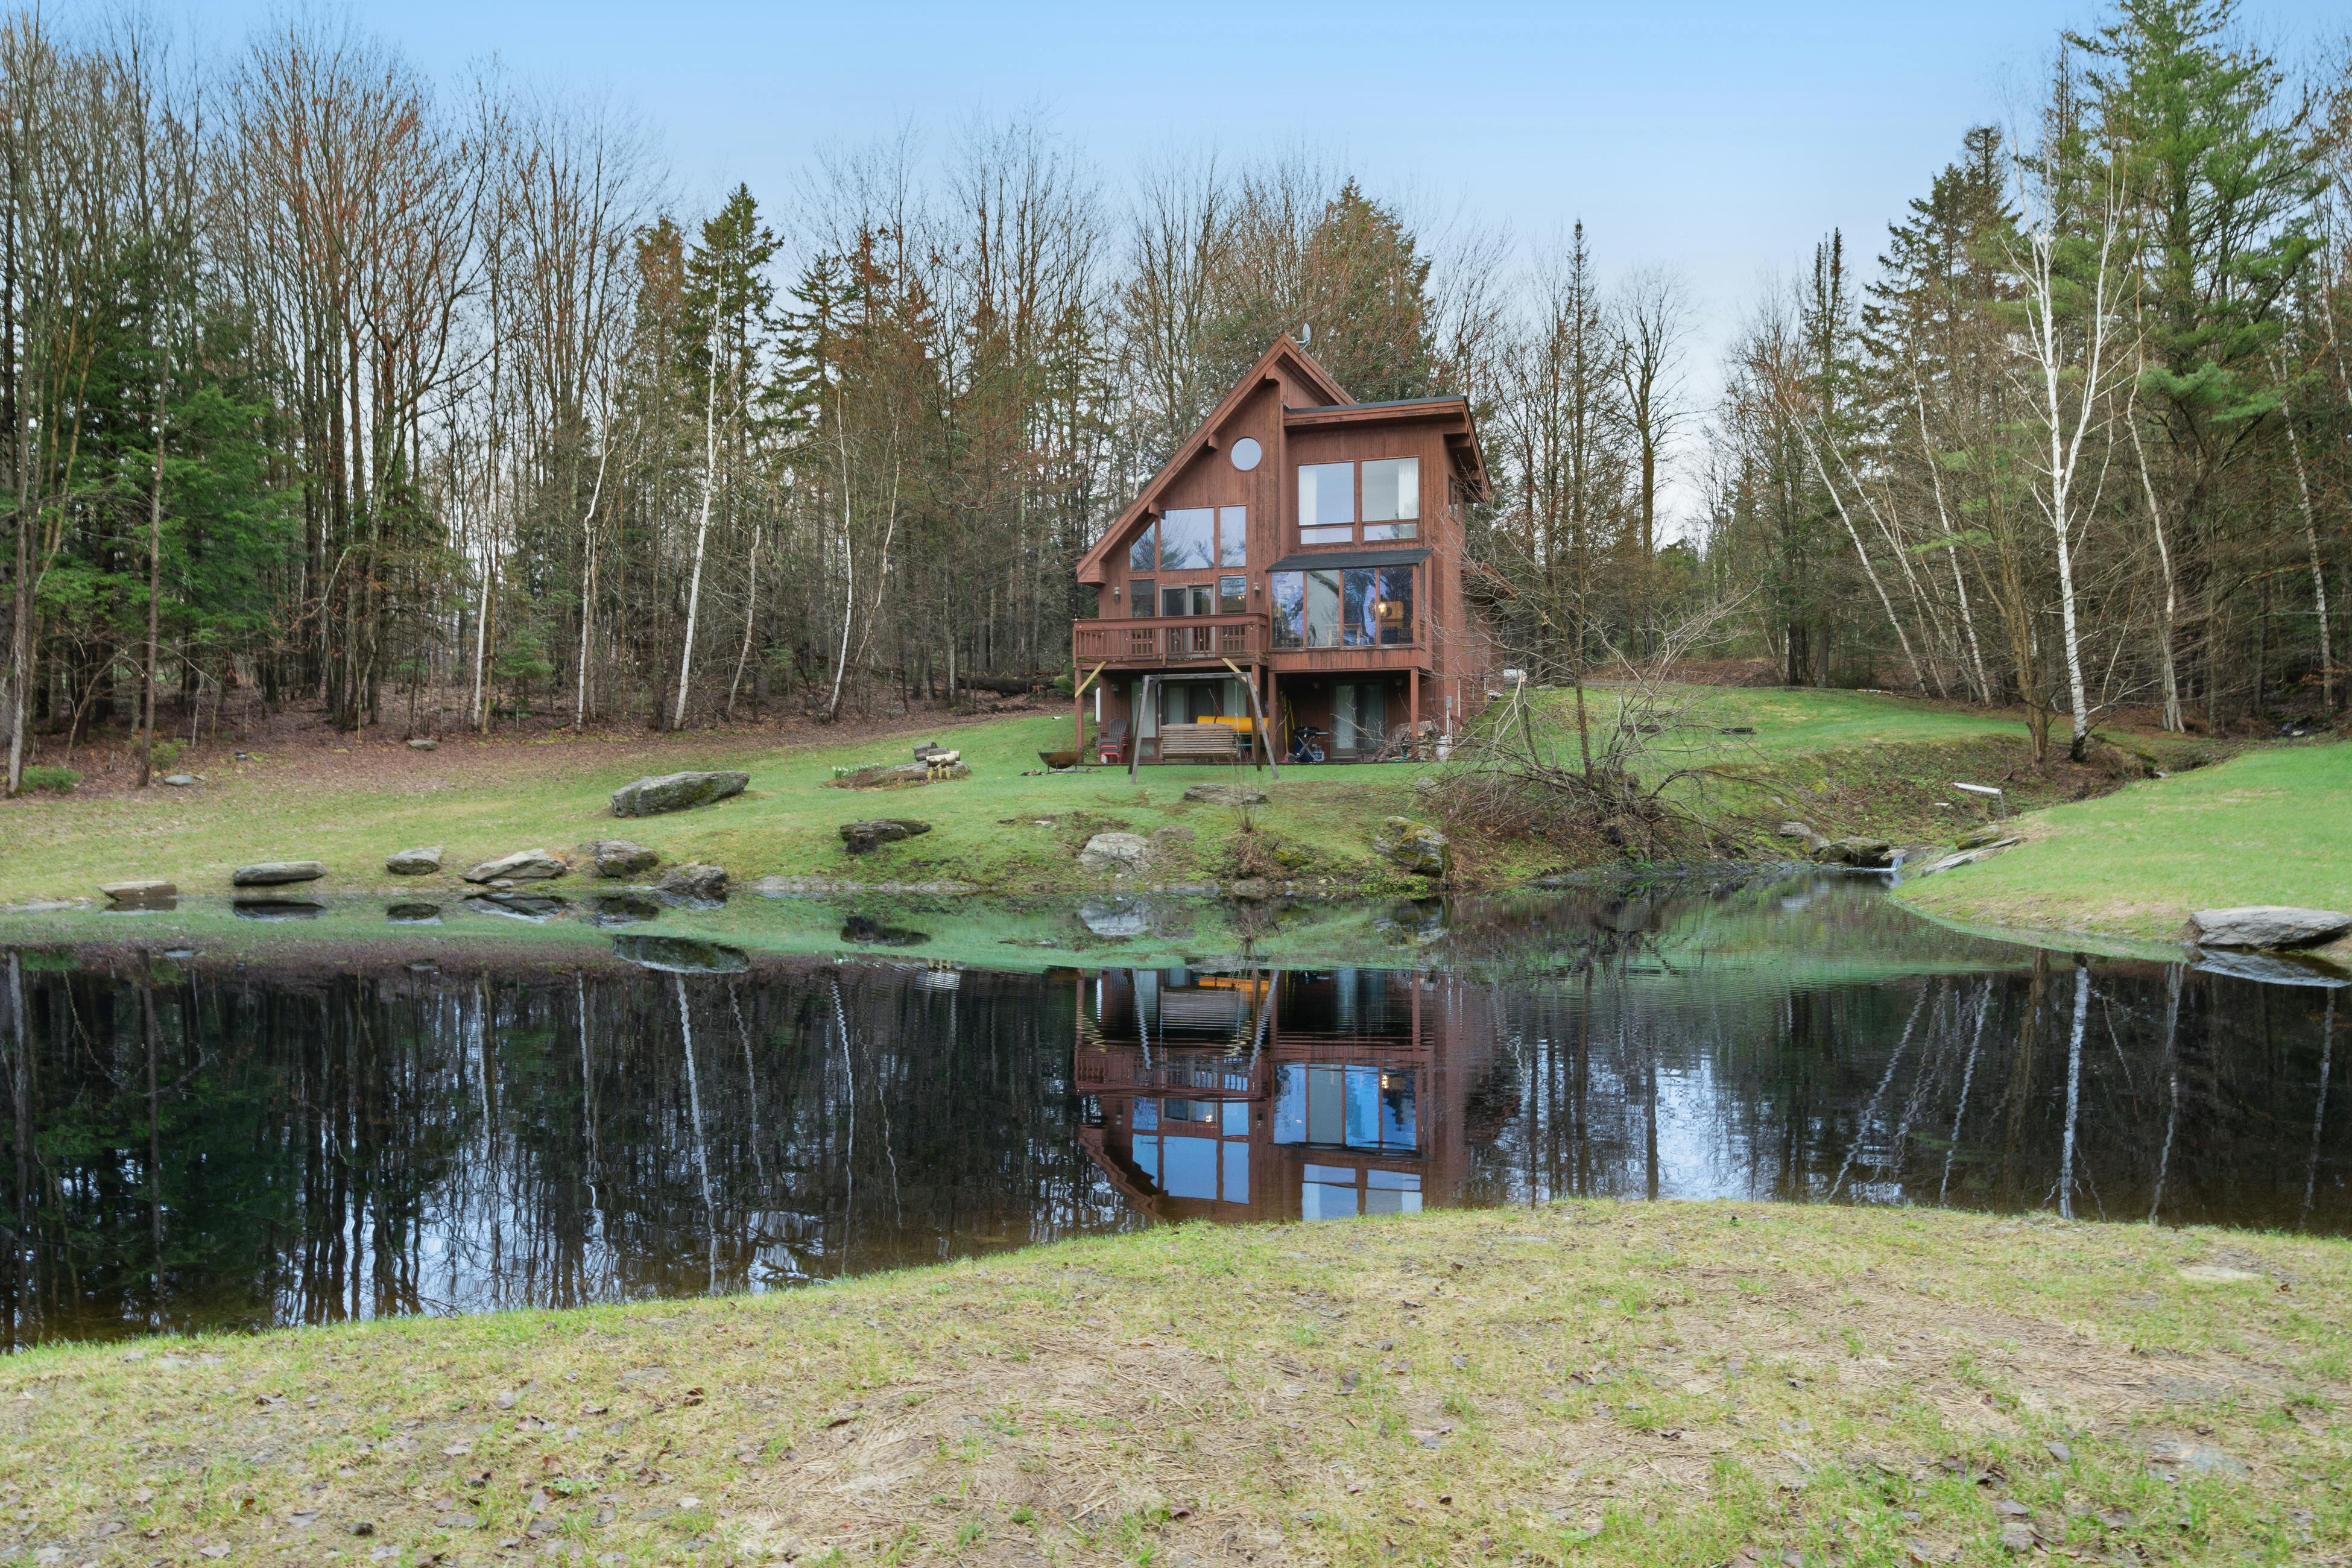 Vacation rental in Stowe, VT surrounded by woods and pond